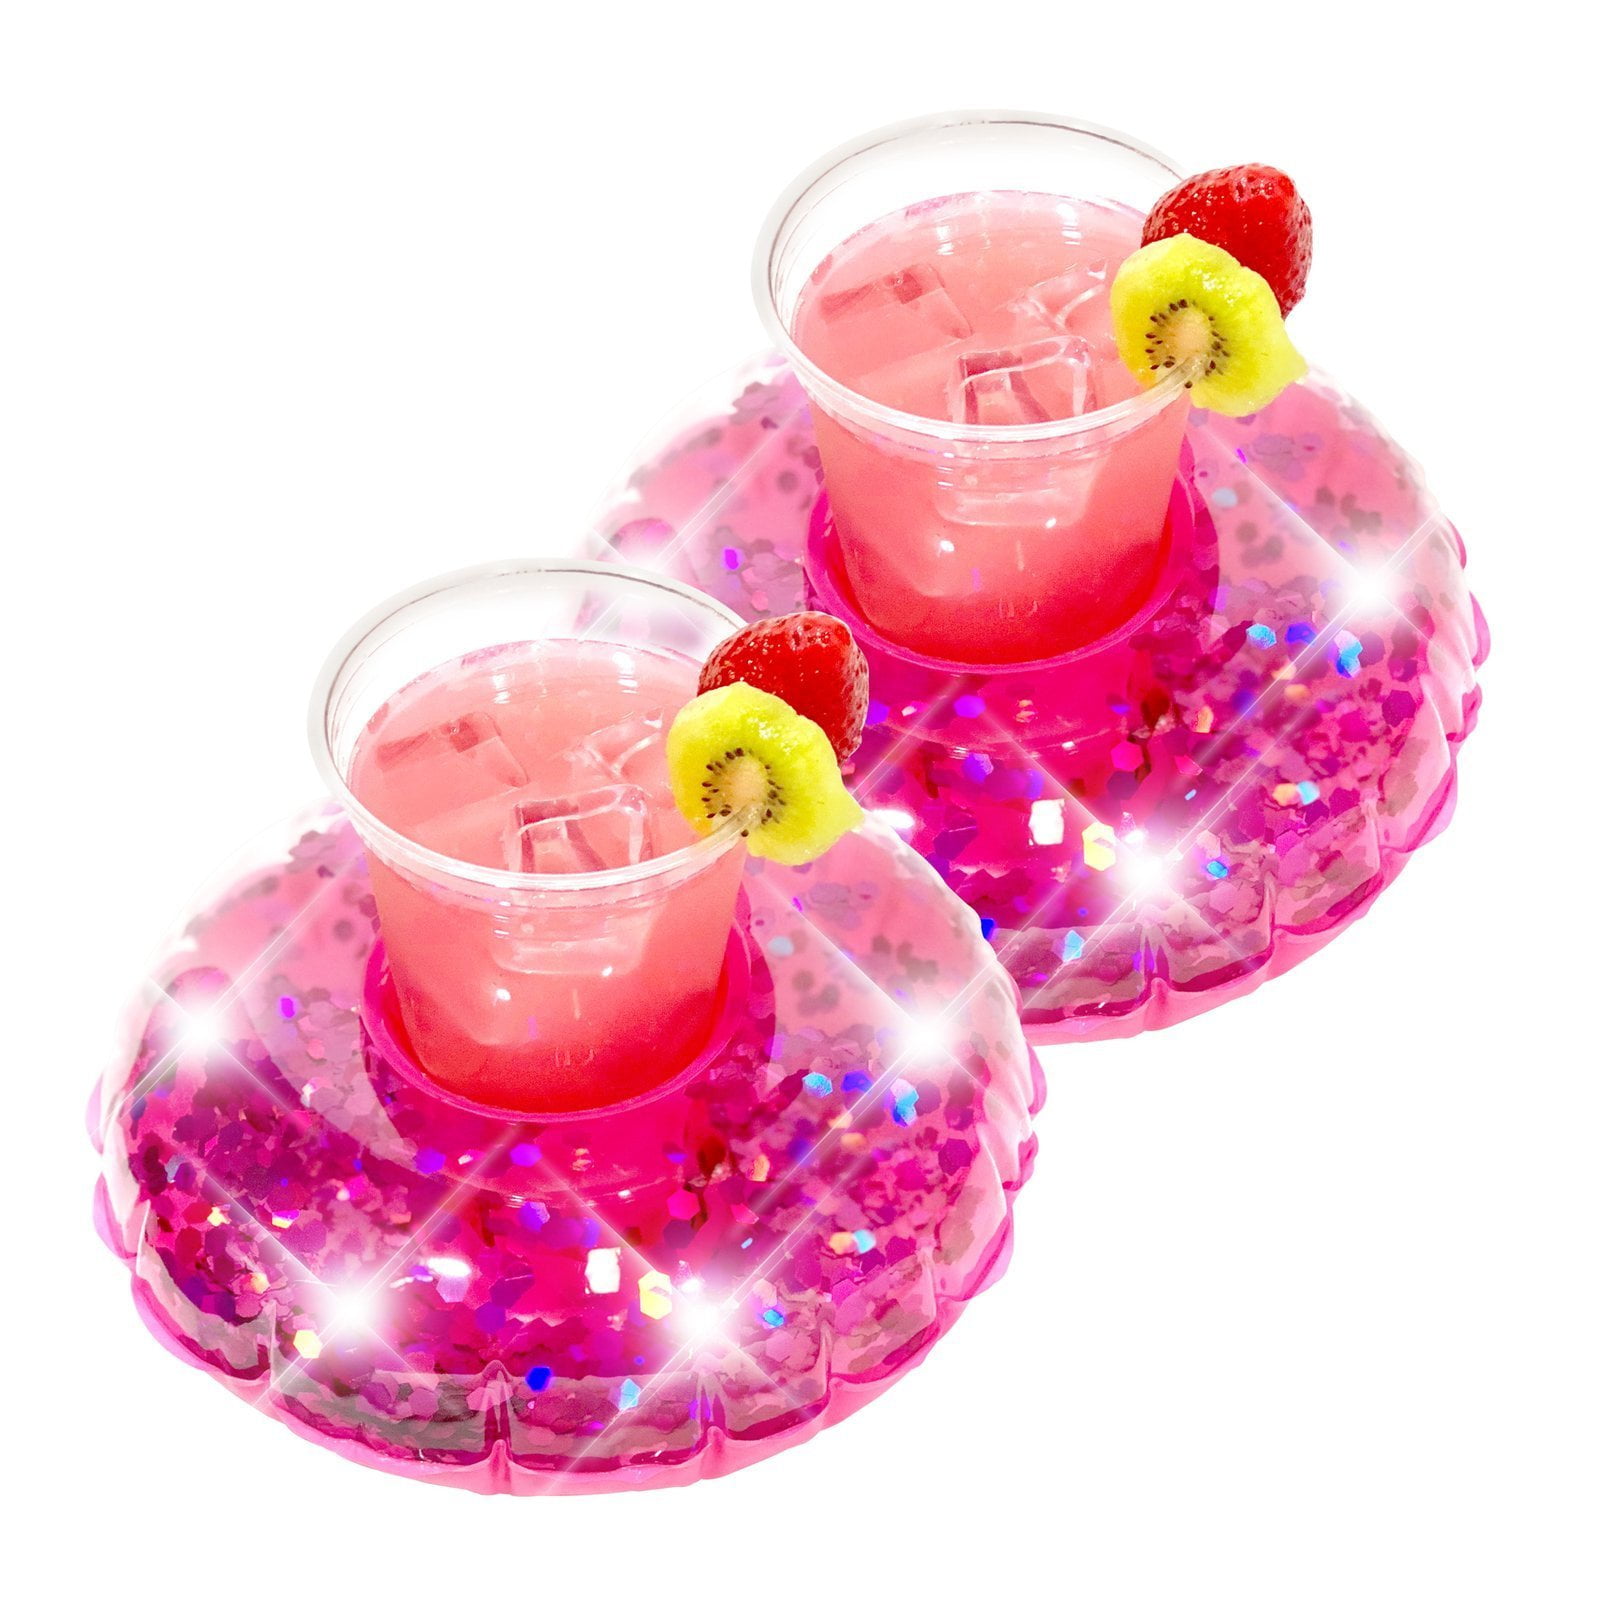 DRINK FLOAT 2 pk Details about   POOLCANDY INFLATABLE HOLOGRAPHIC color Changing